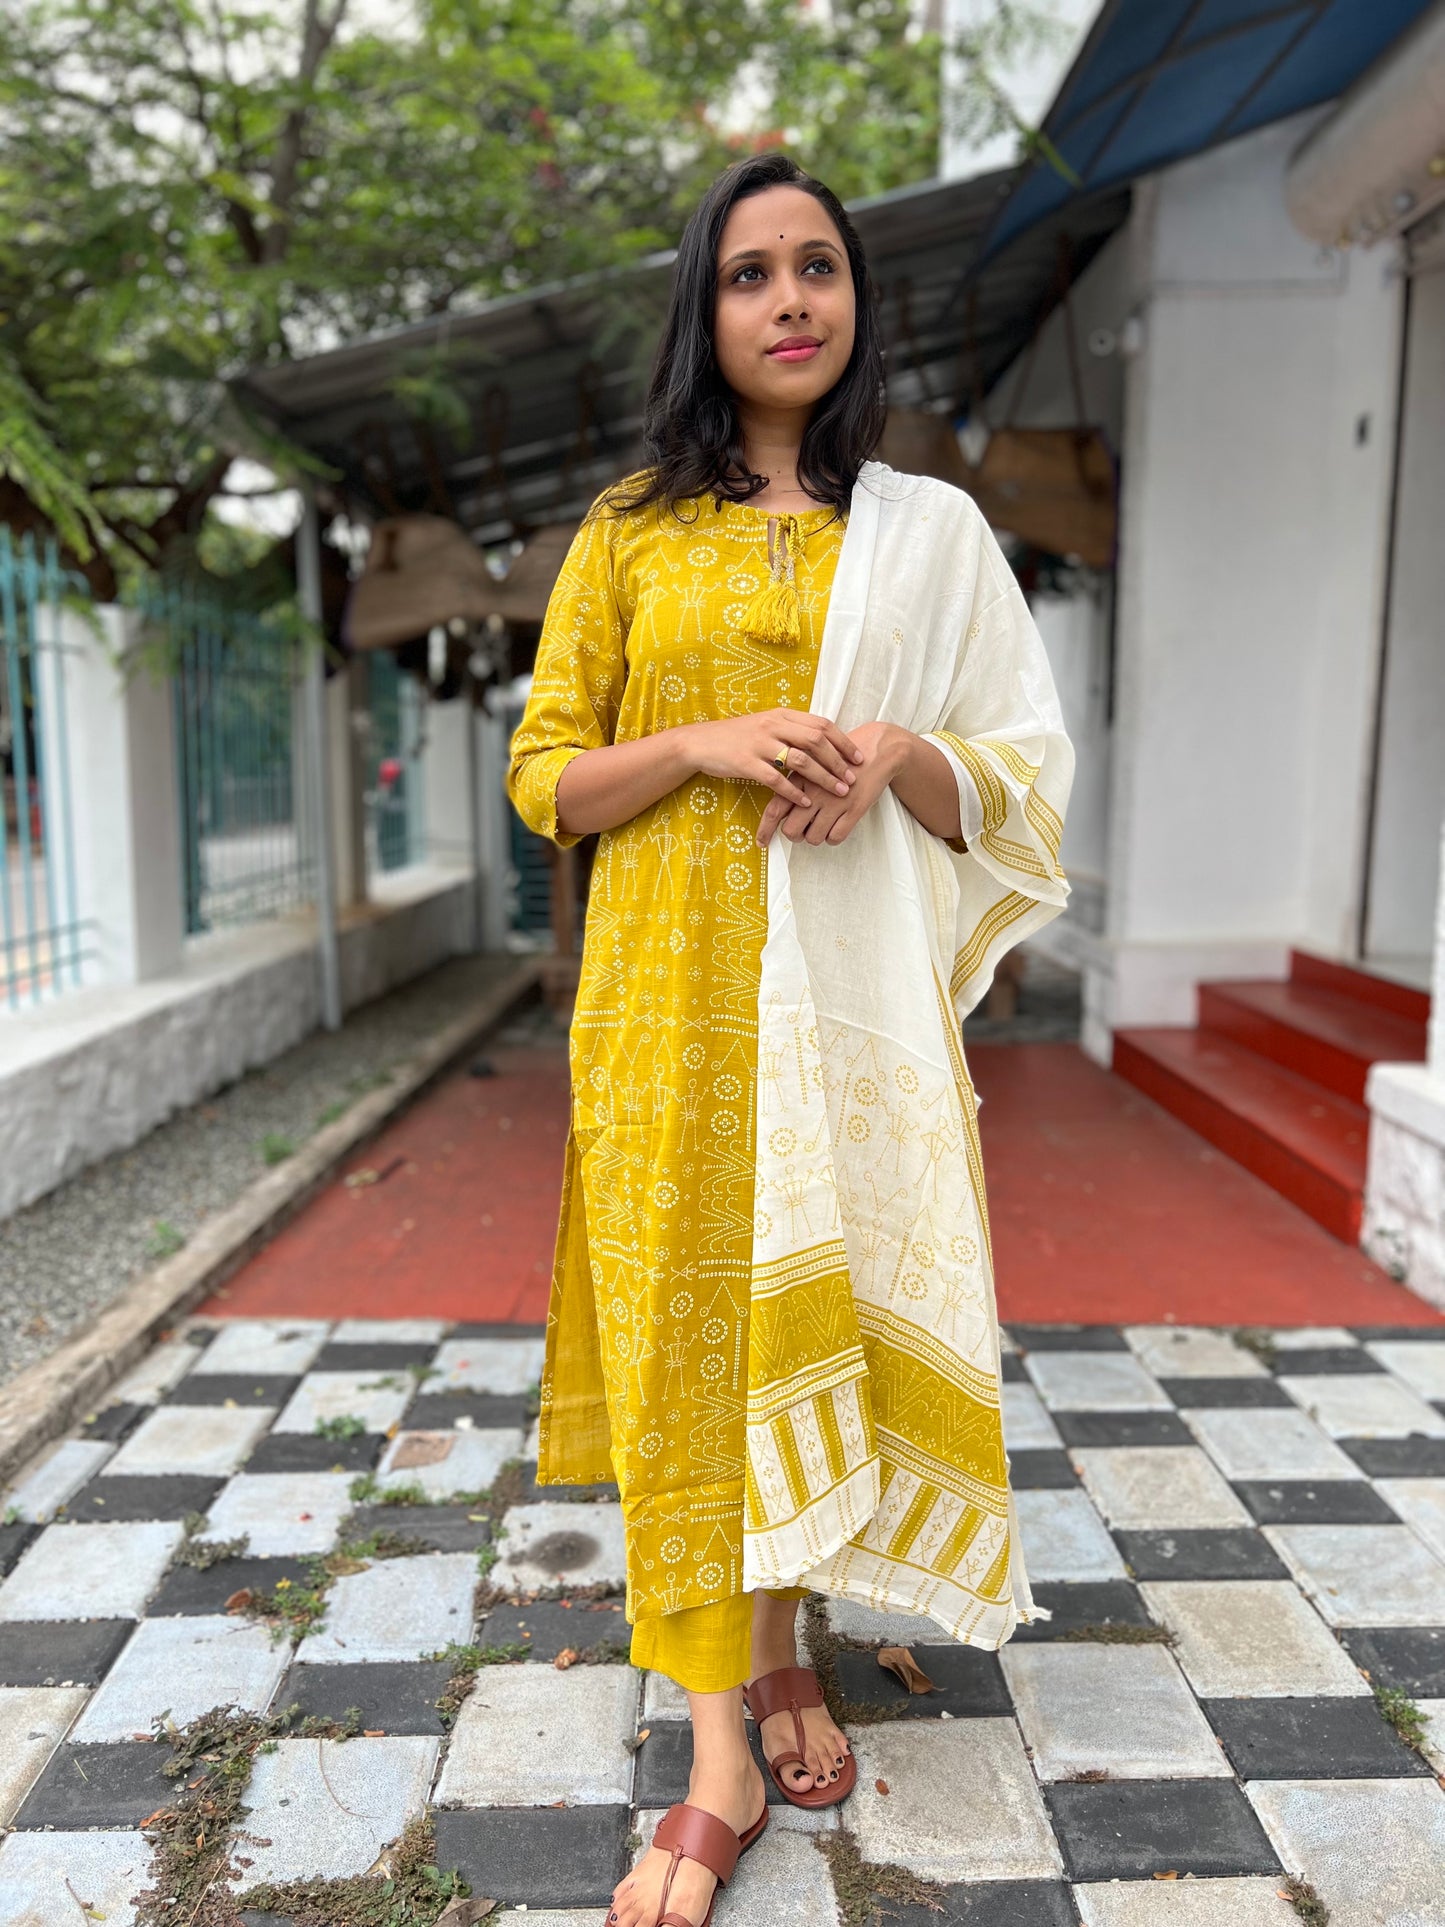 Southloom Stitched Cotton Salwar Set in Mustard Yellow with Prints